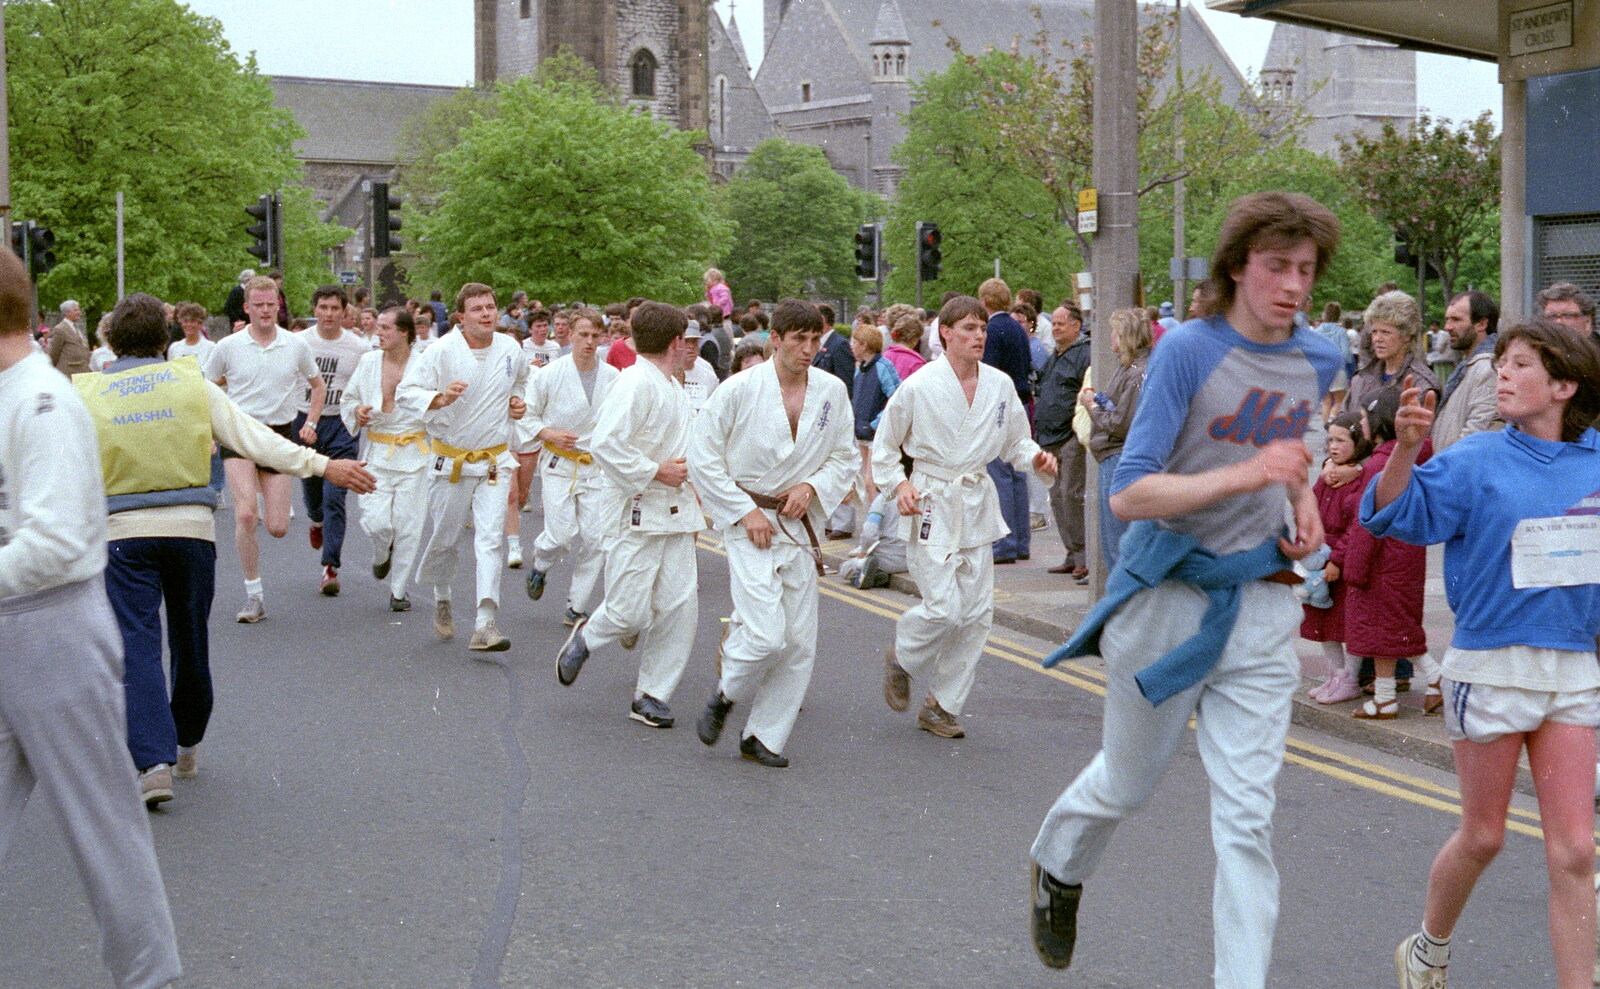 A karate club head up St. Andrew's Cross from Uni: Sport Aid - Run The World, Plymouth, Devon - 25th May 1986